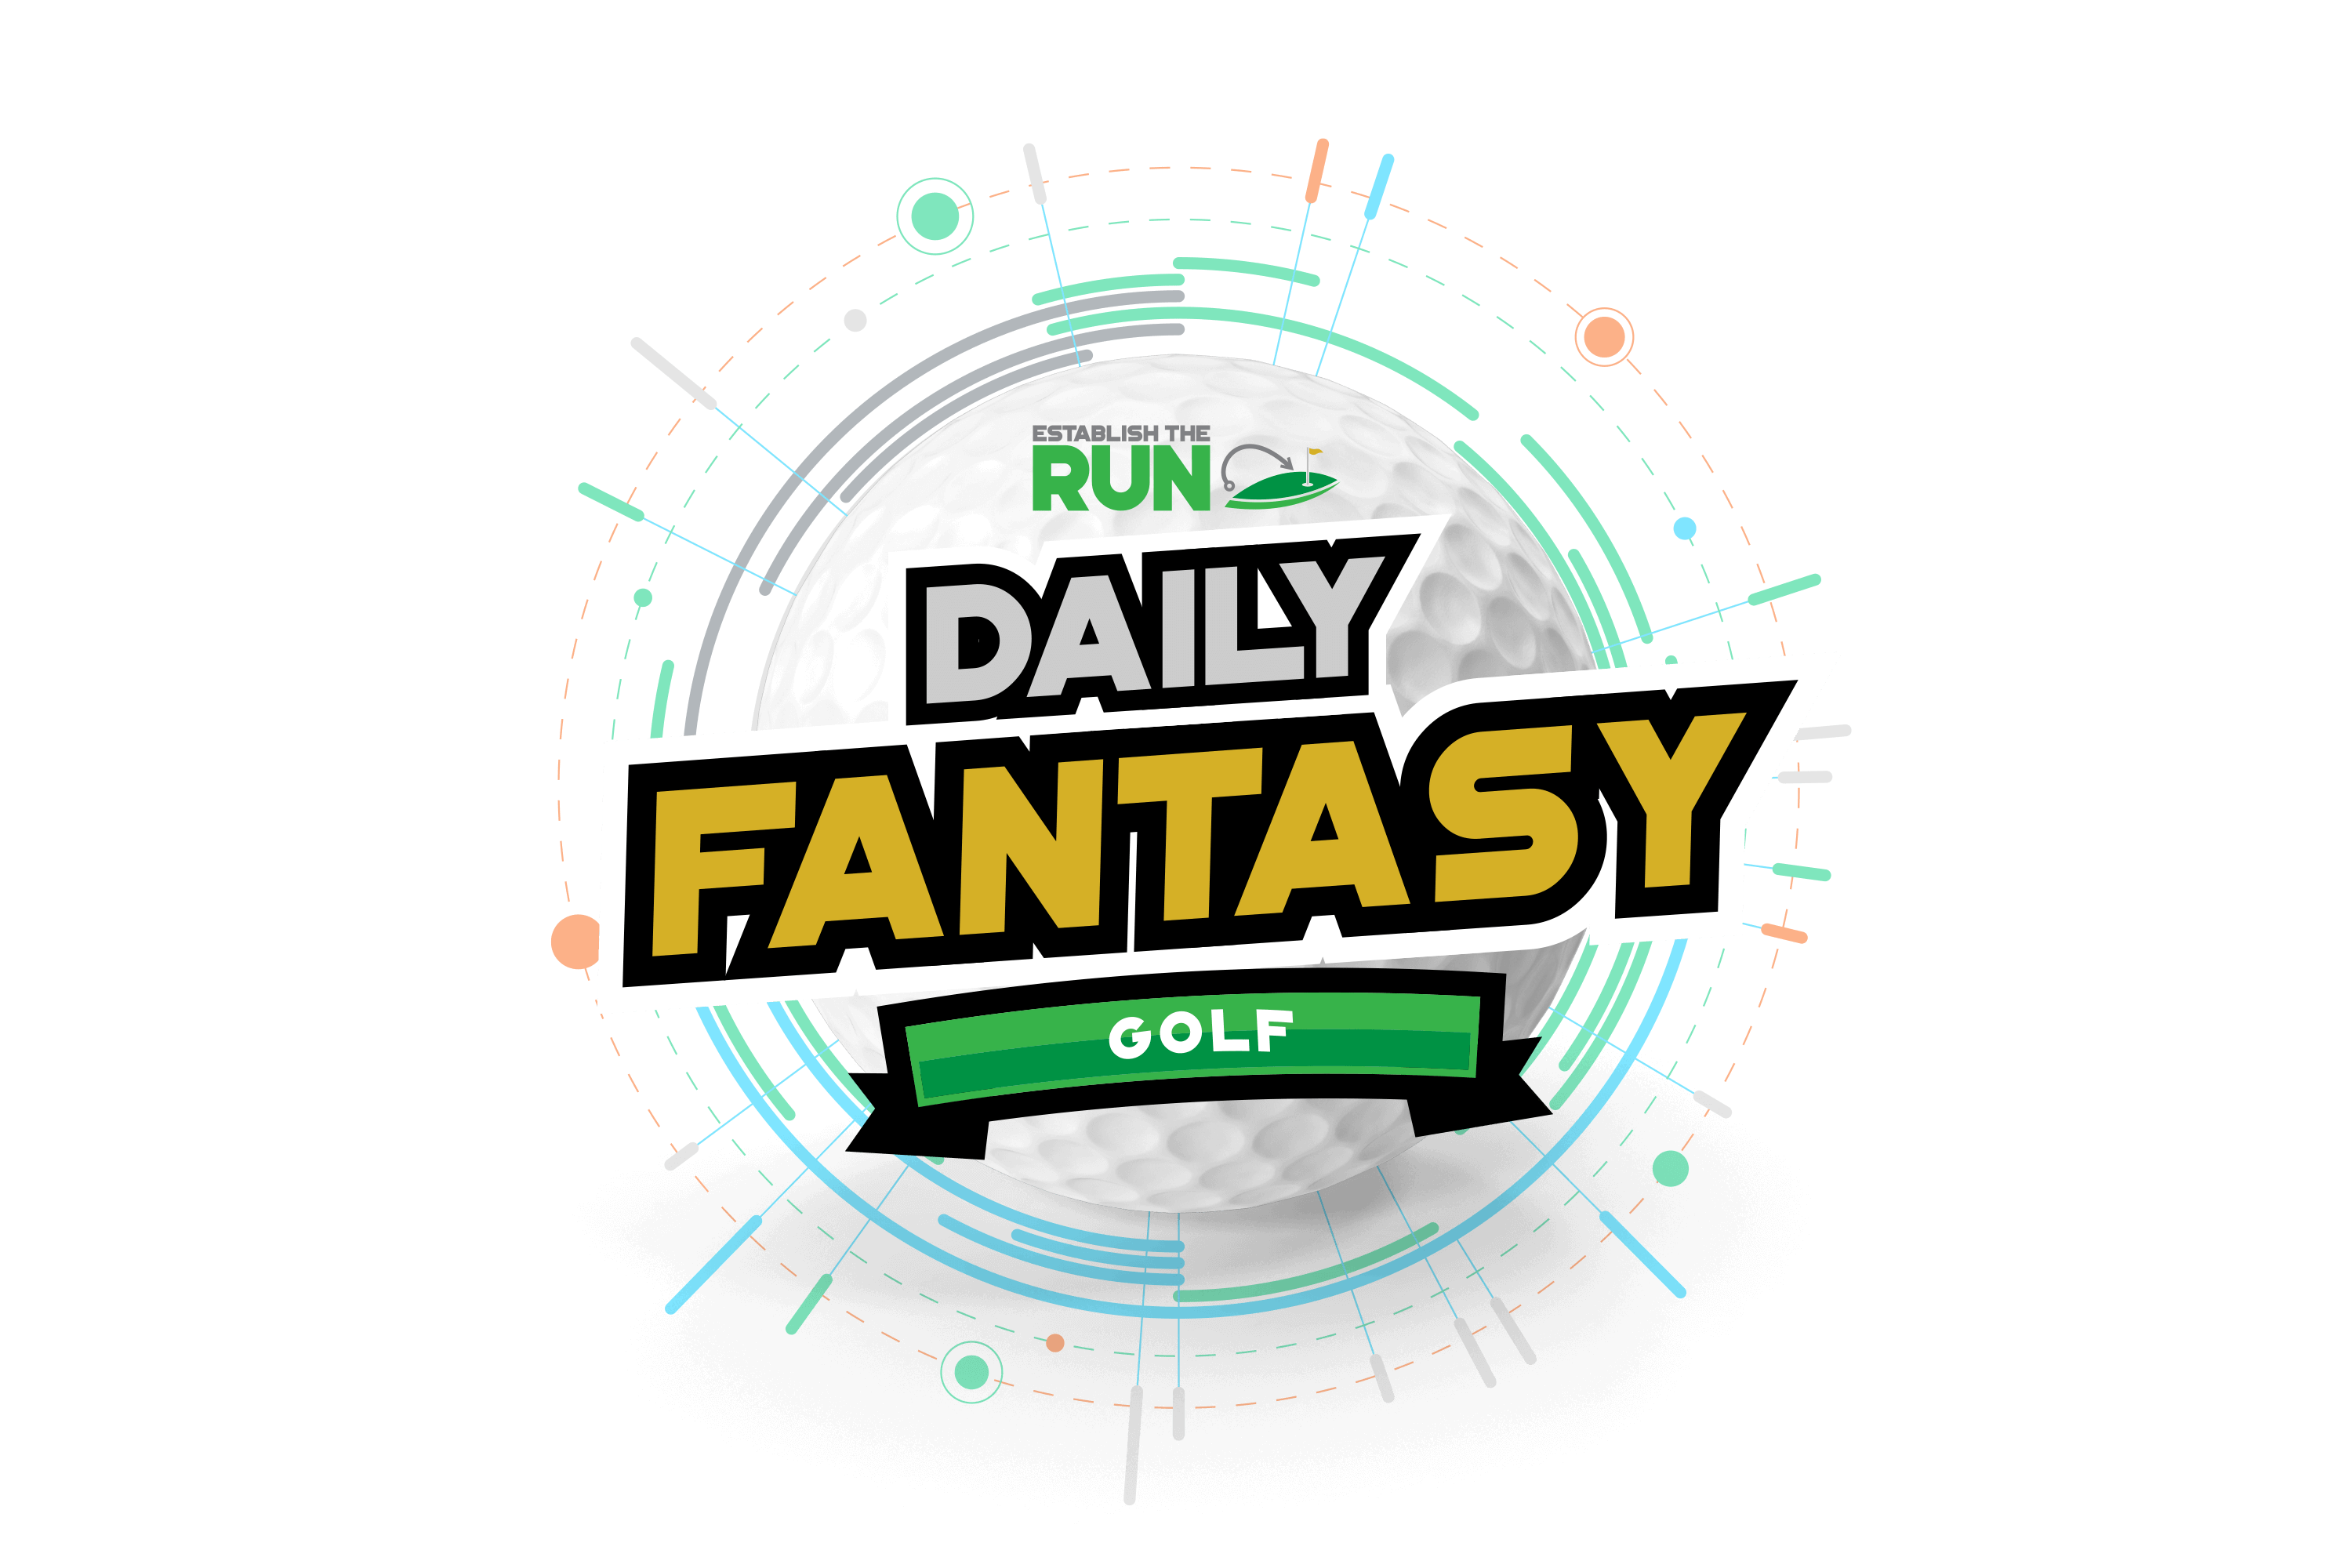 DraftKings Golf Projections